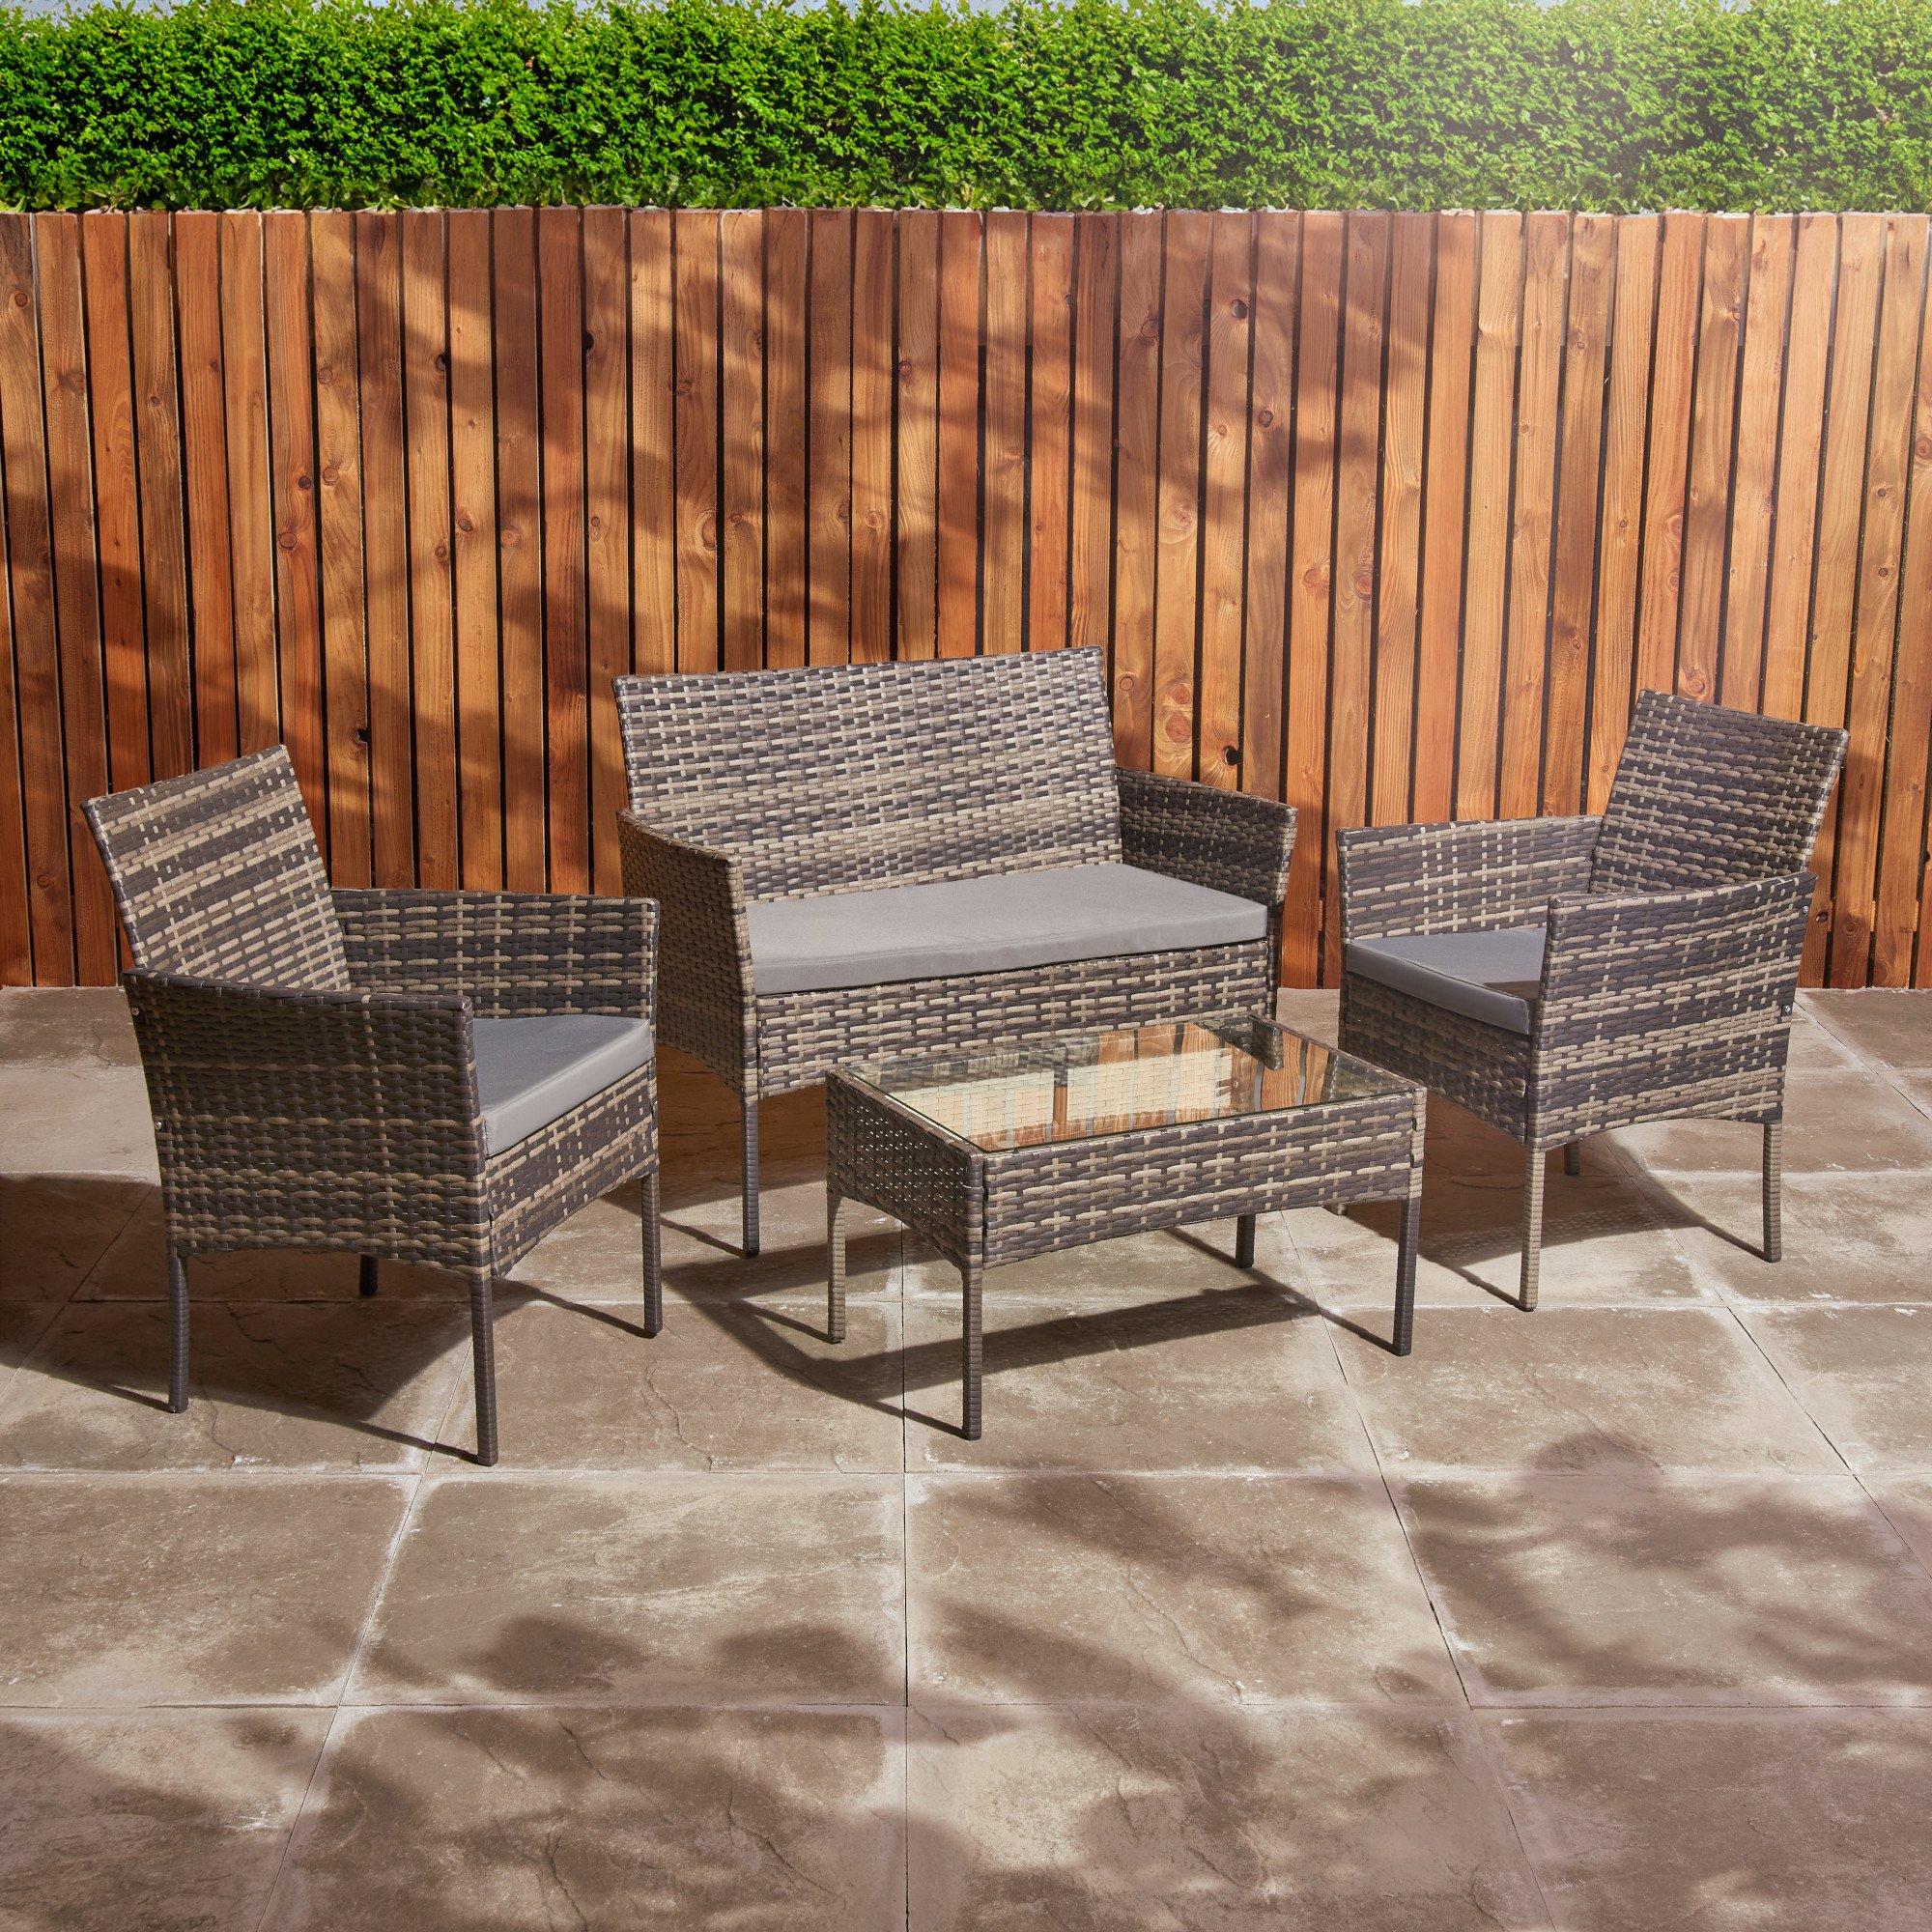 Rattan Furniture Set 4 Seater Patio Table & Chairs